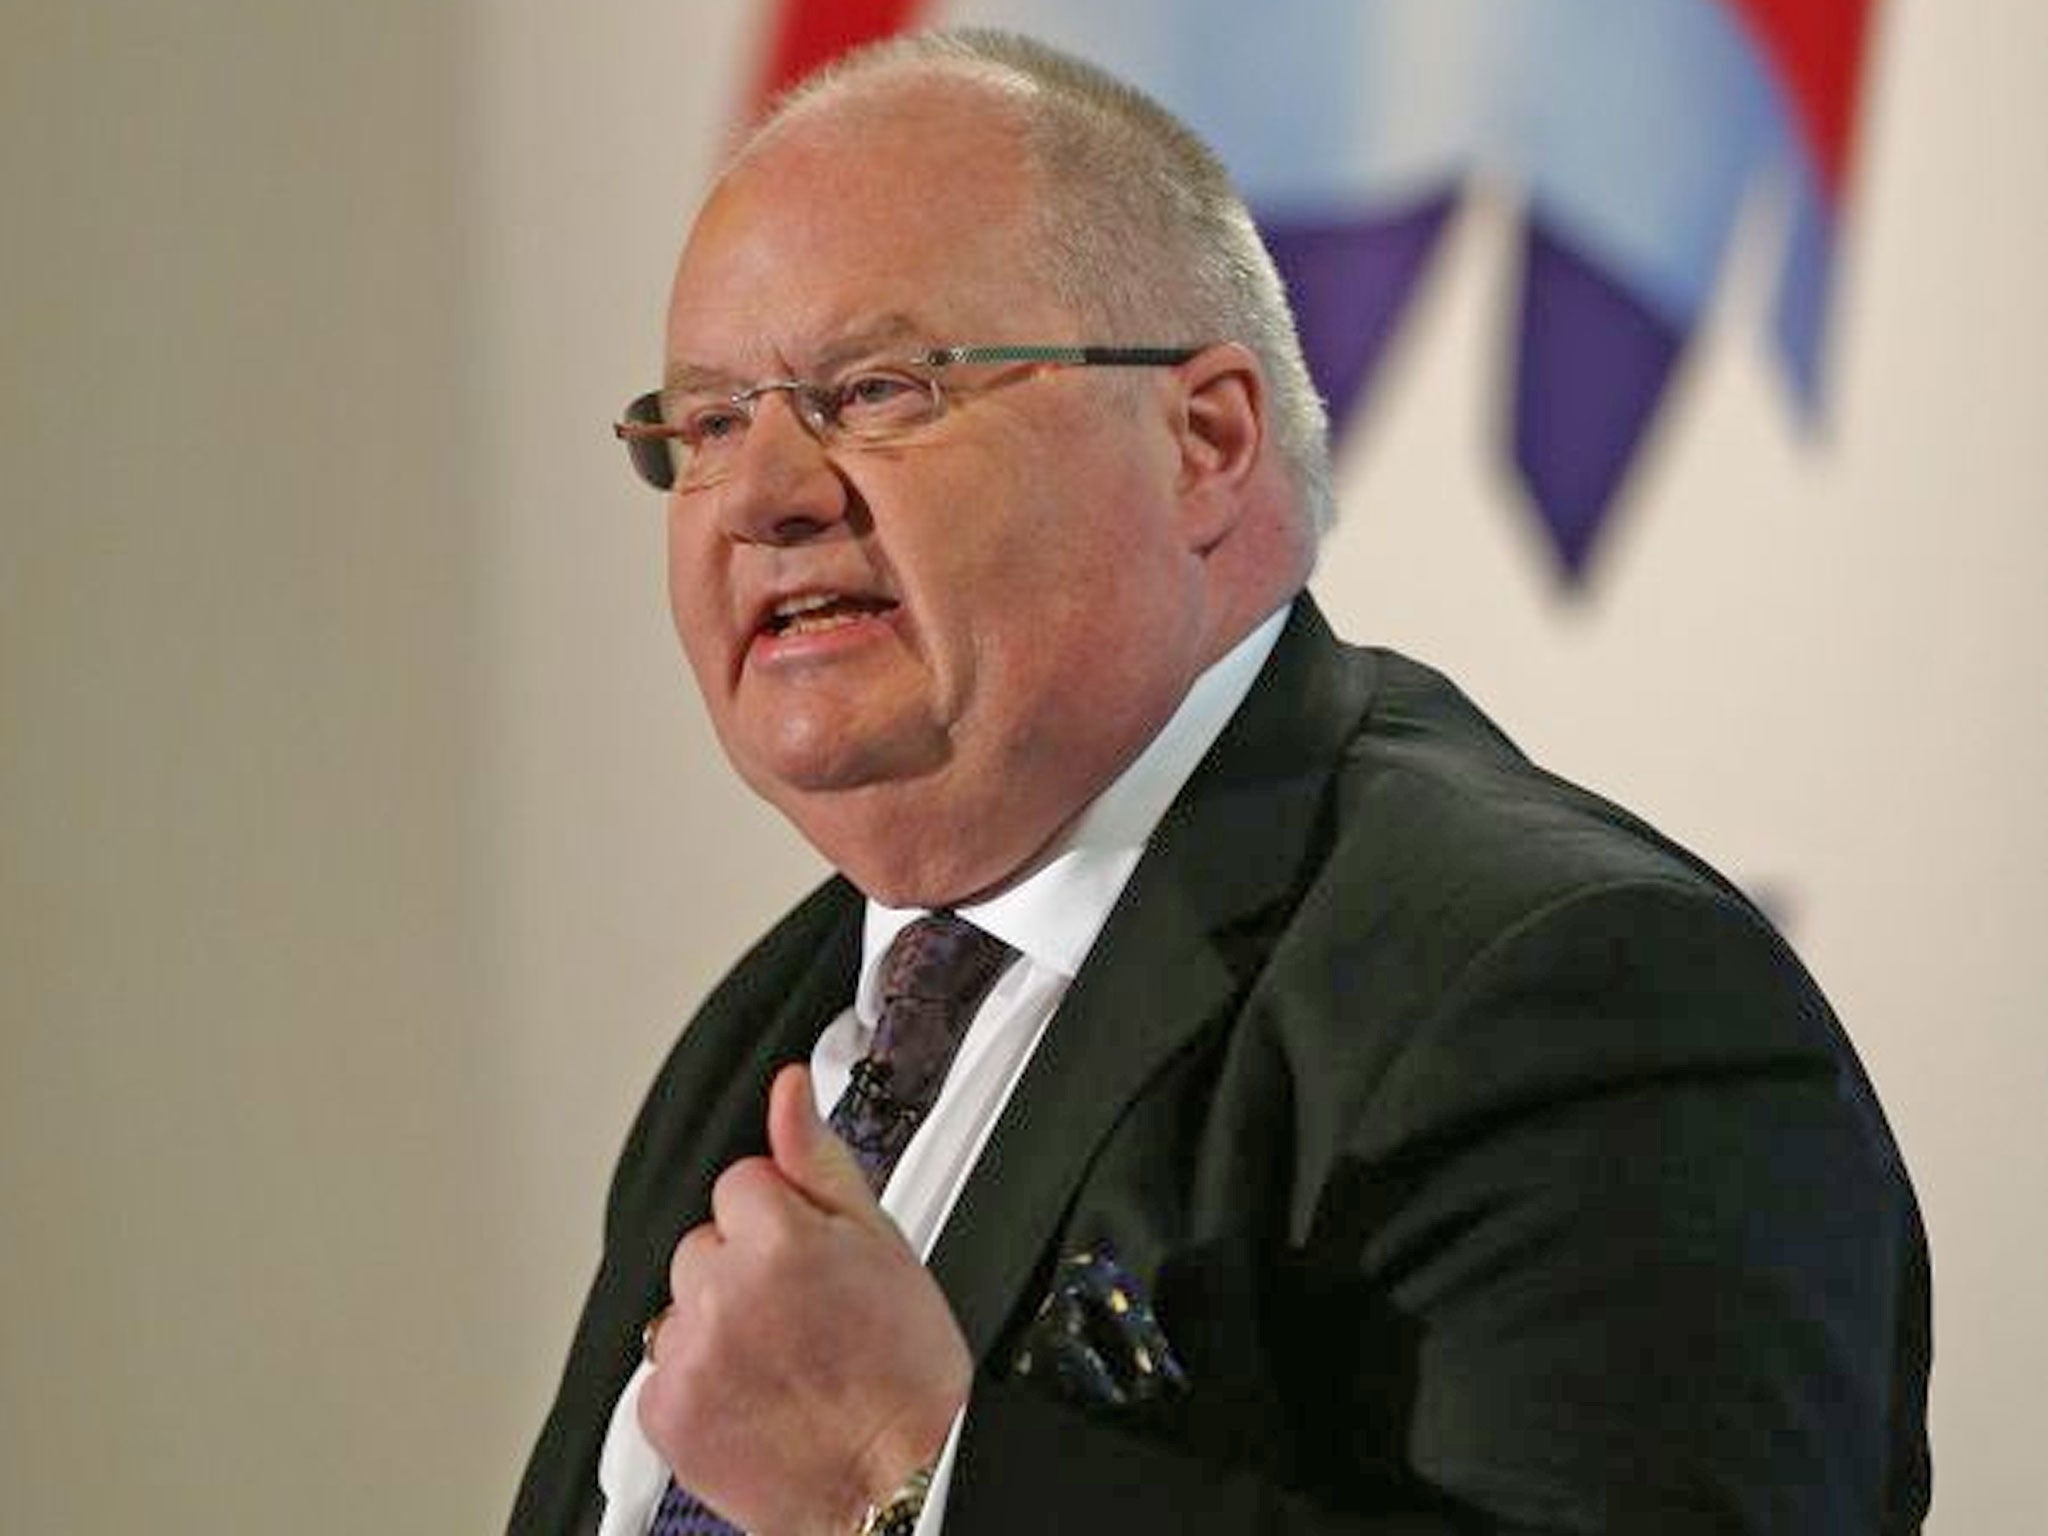 Communities Secretary Eric Pickles still claims real-terms cut since 2010